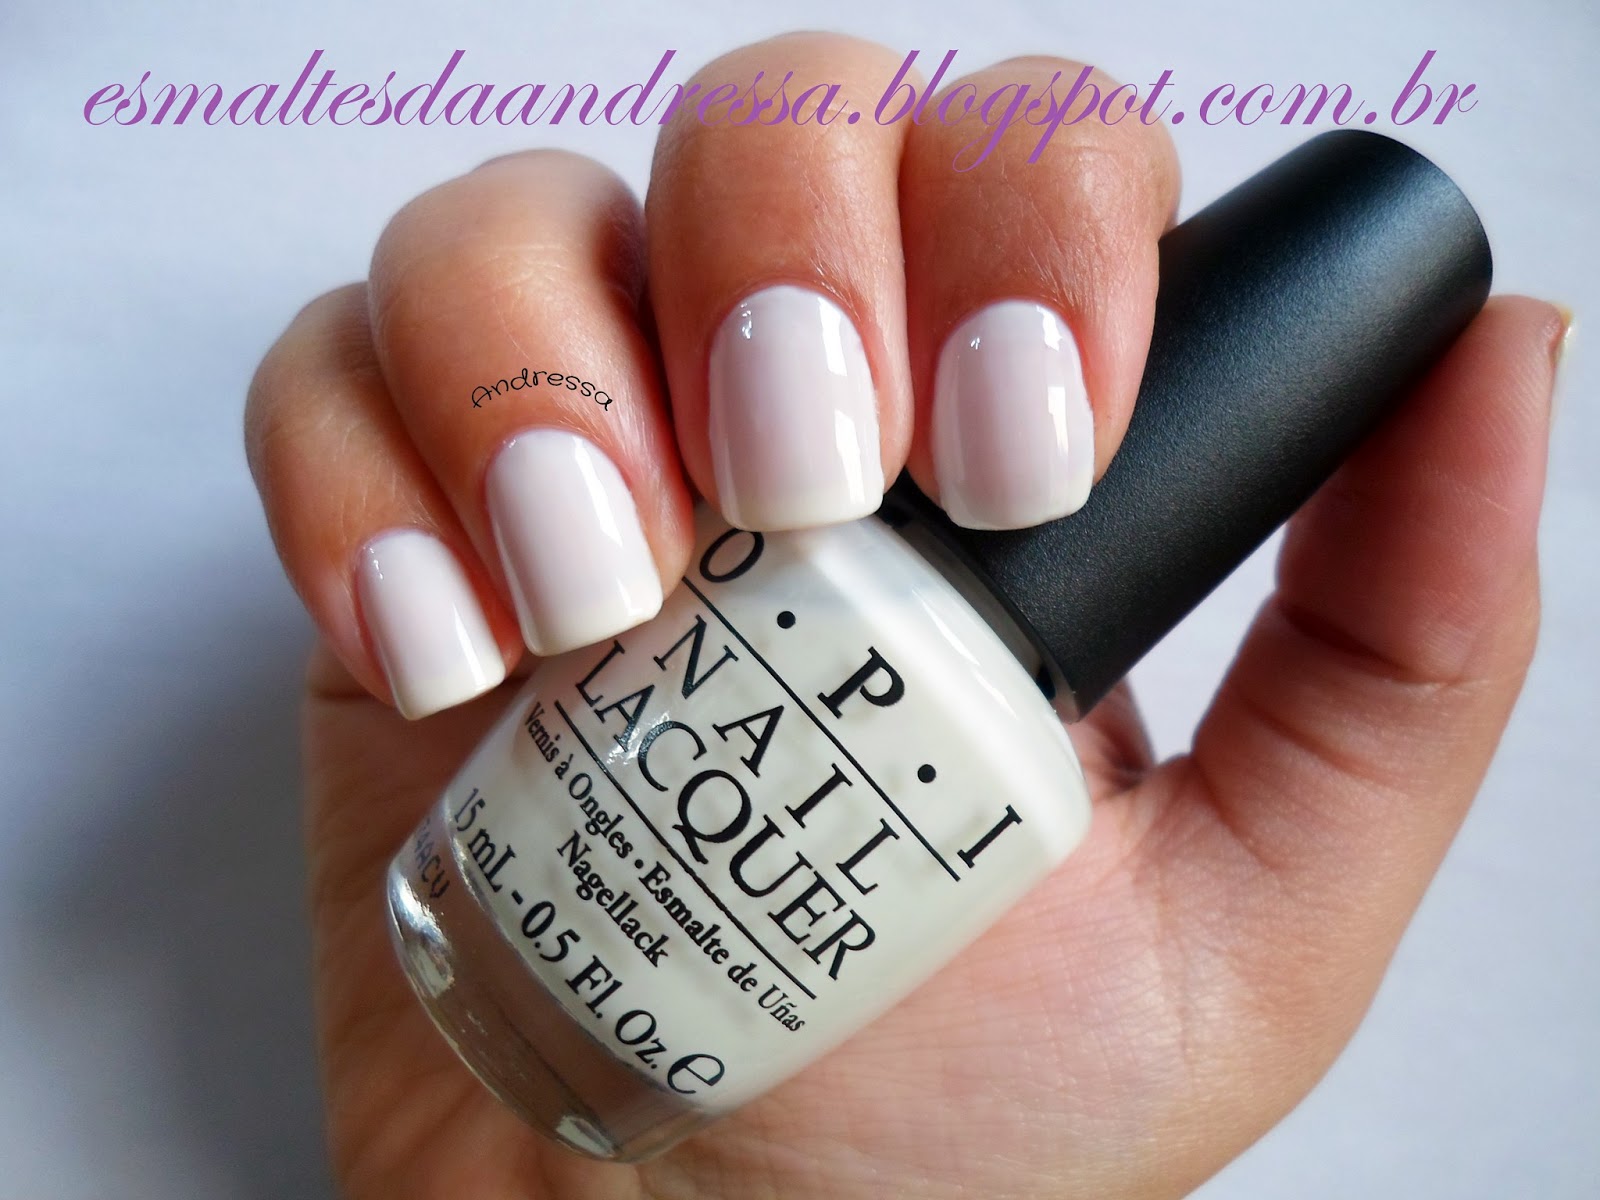 6. OPI "Funny Bunny" - wide 3